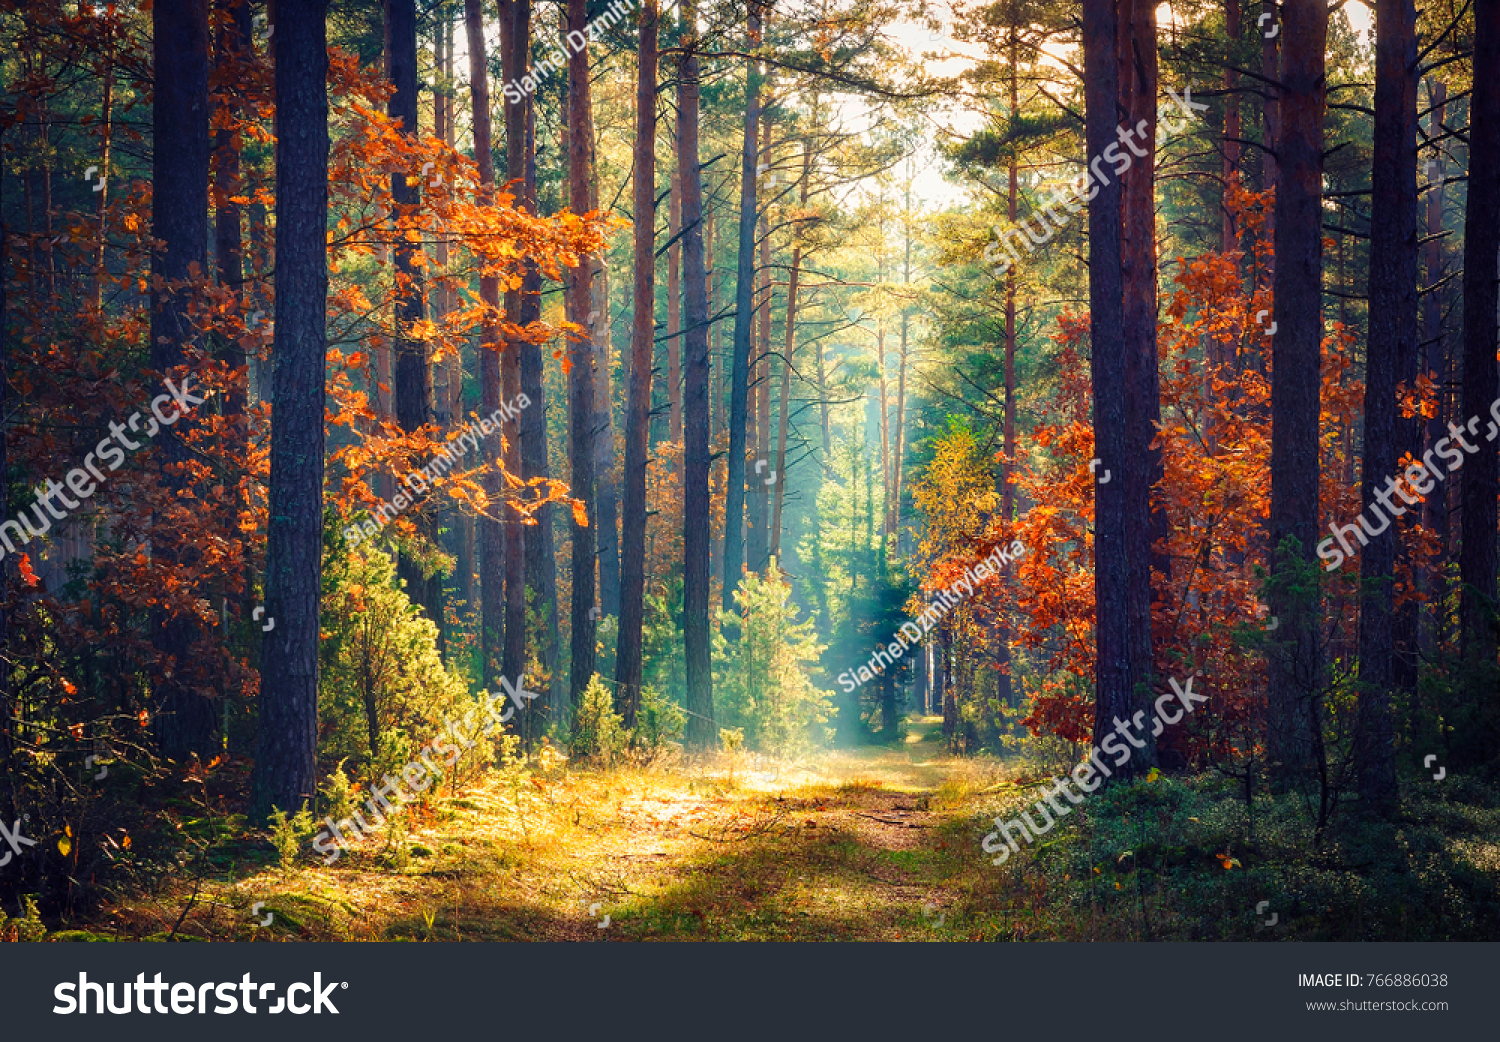 Autumn forest nature. Vivid morning in colorful forest with sun rays through branches of trees. Scenery of nature with sunlight #766886038